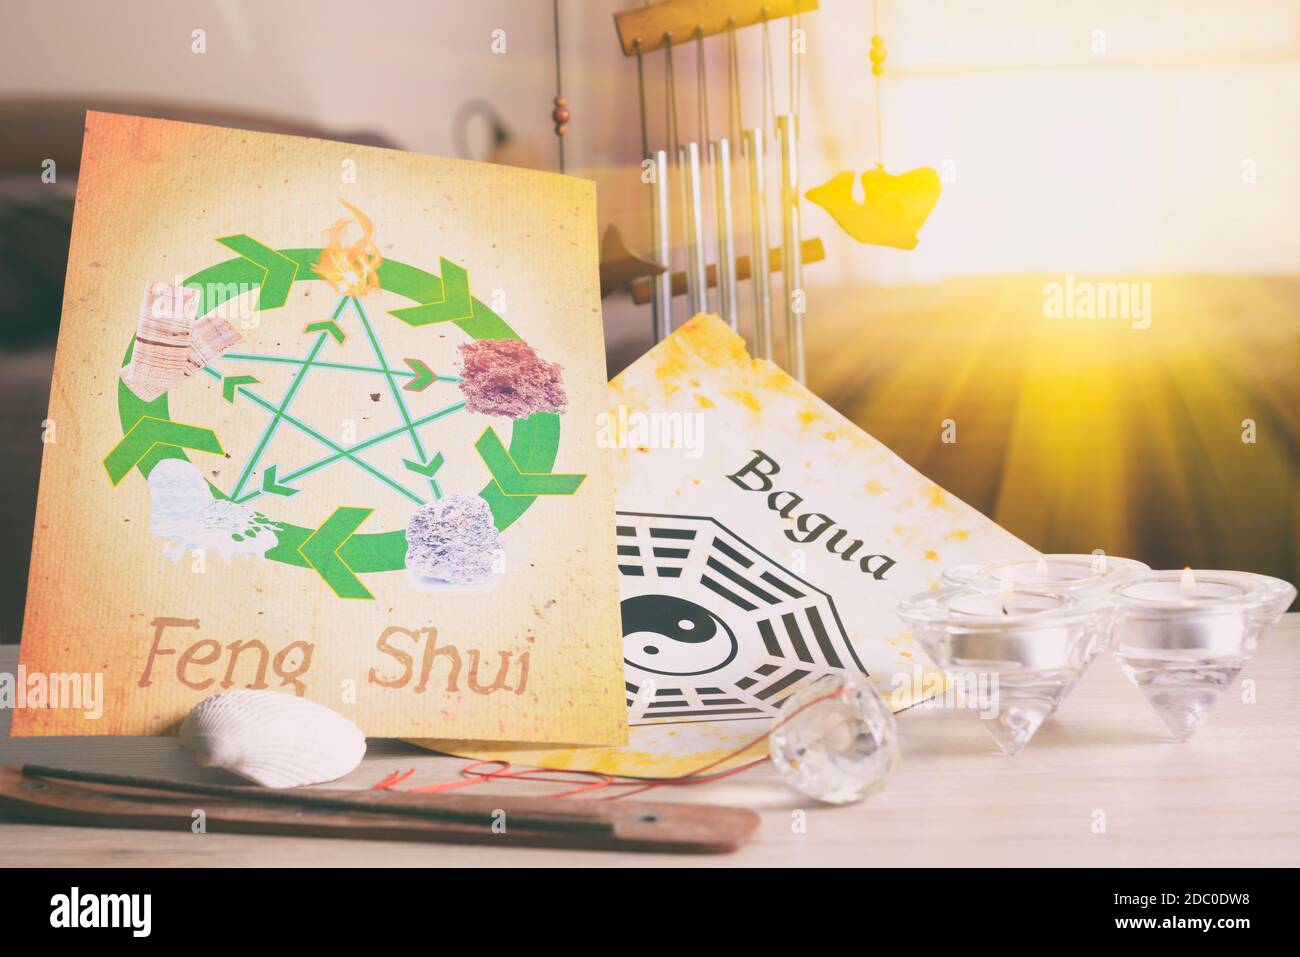 Conceptual image of Feng Shui with five elements Stock Photo